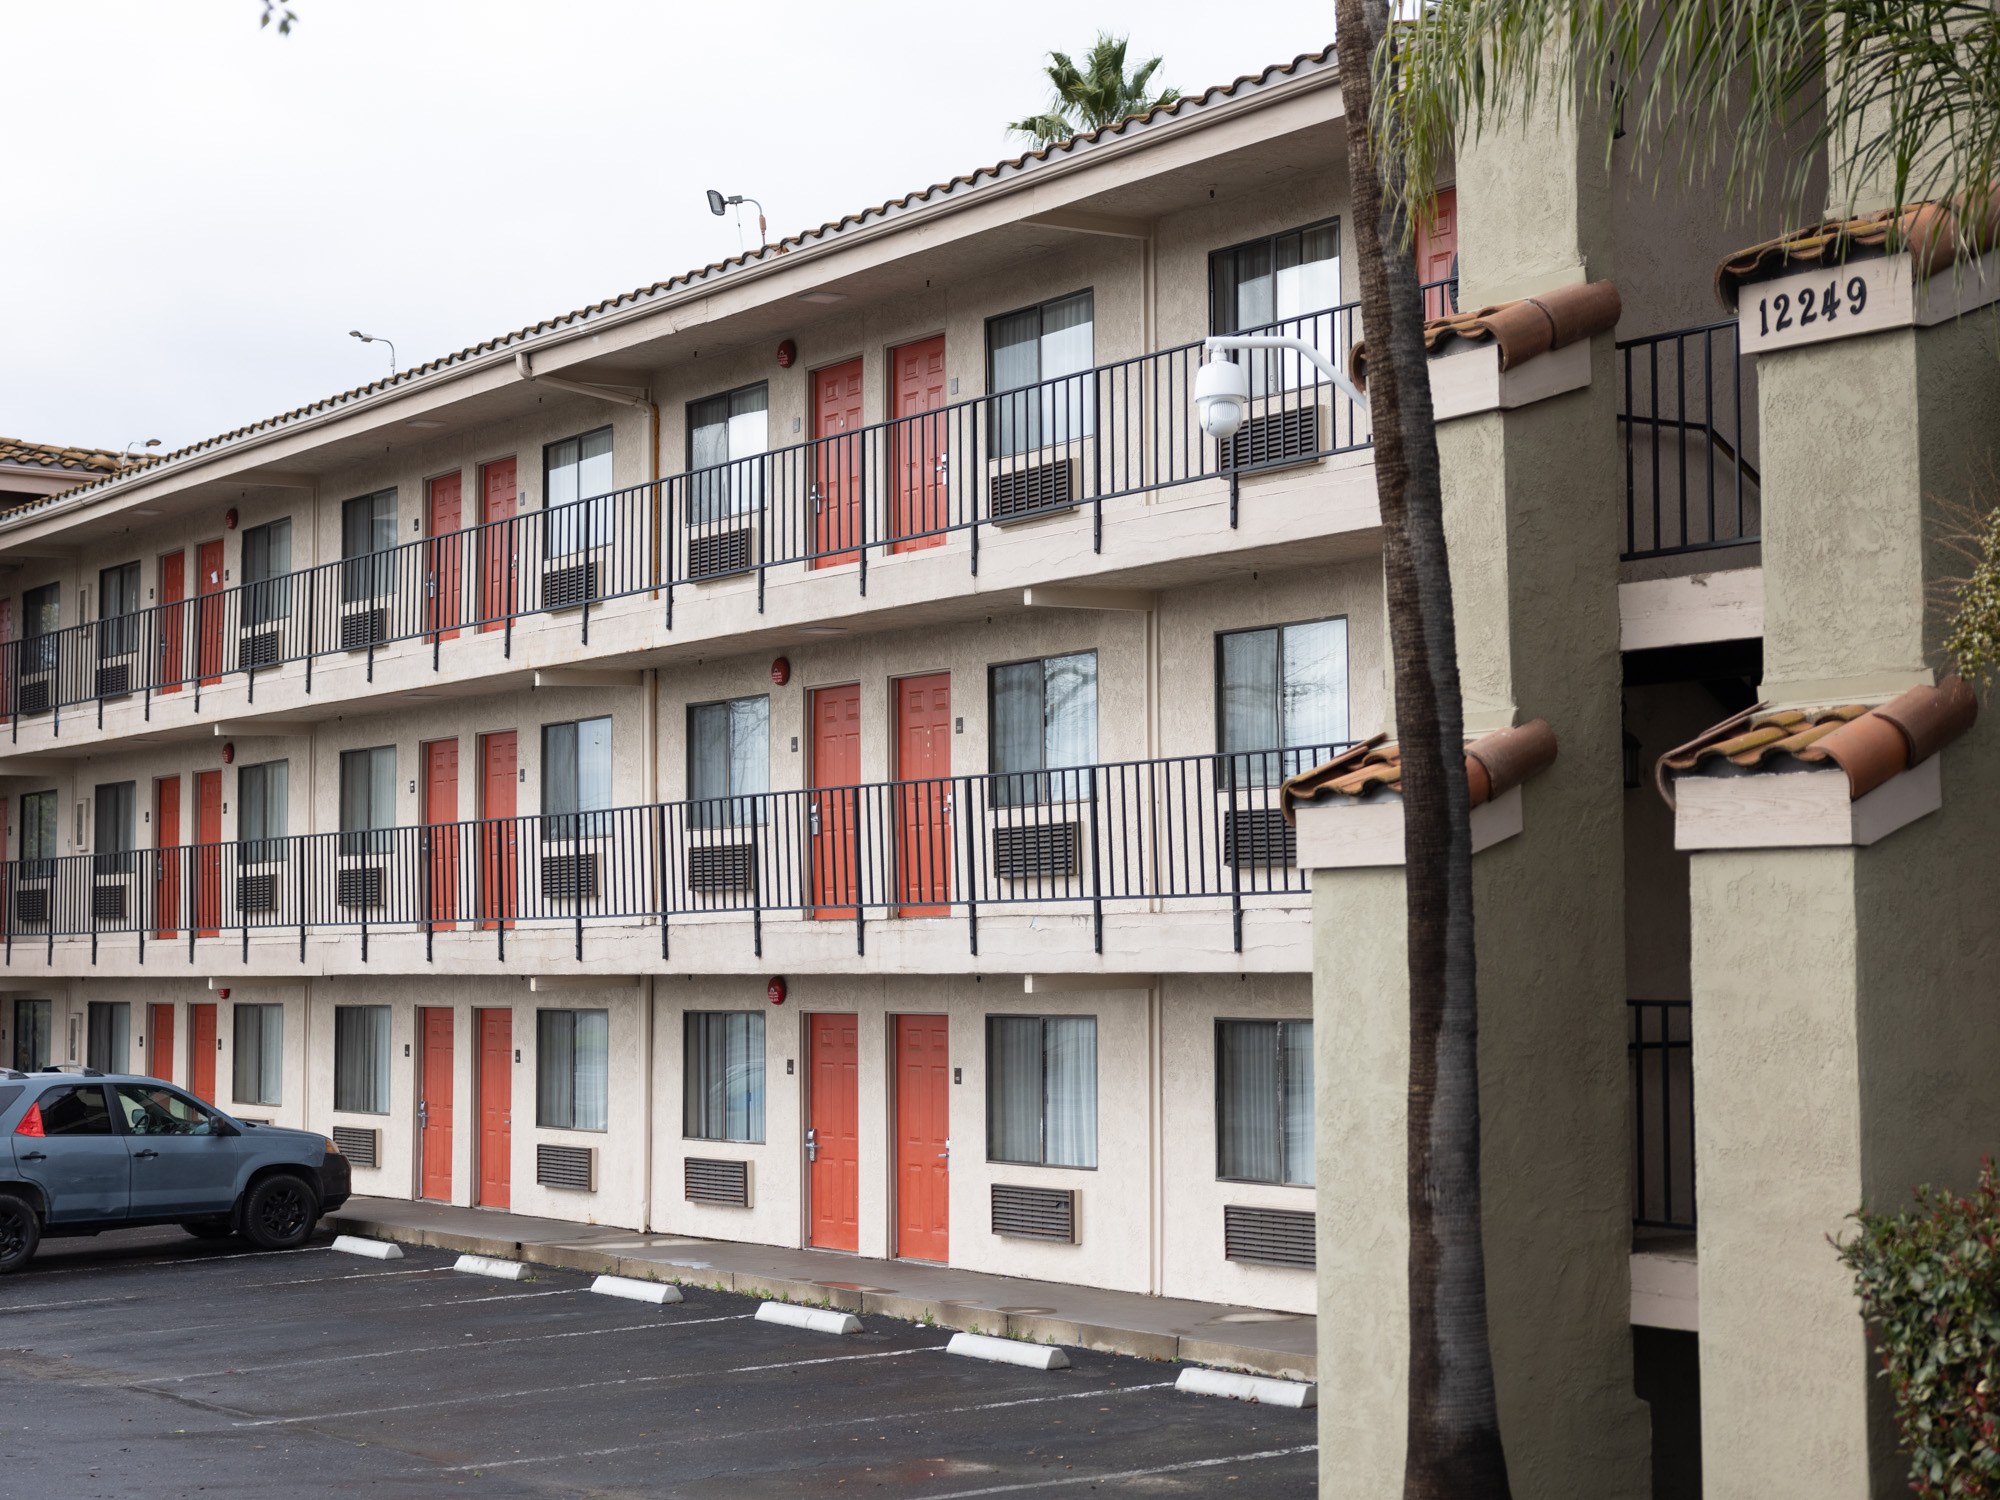 Project Roomkey motels extended for homeless residents 50 years in local news Major holidays this time of year image picture